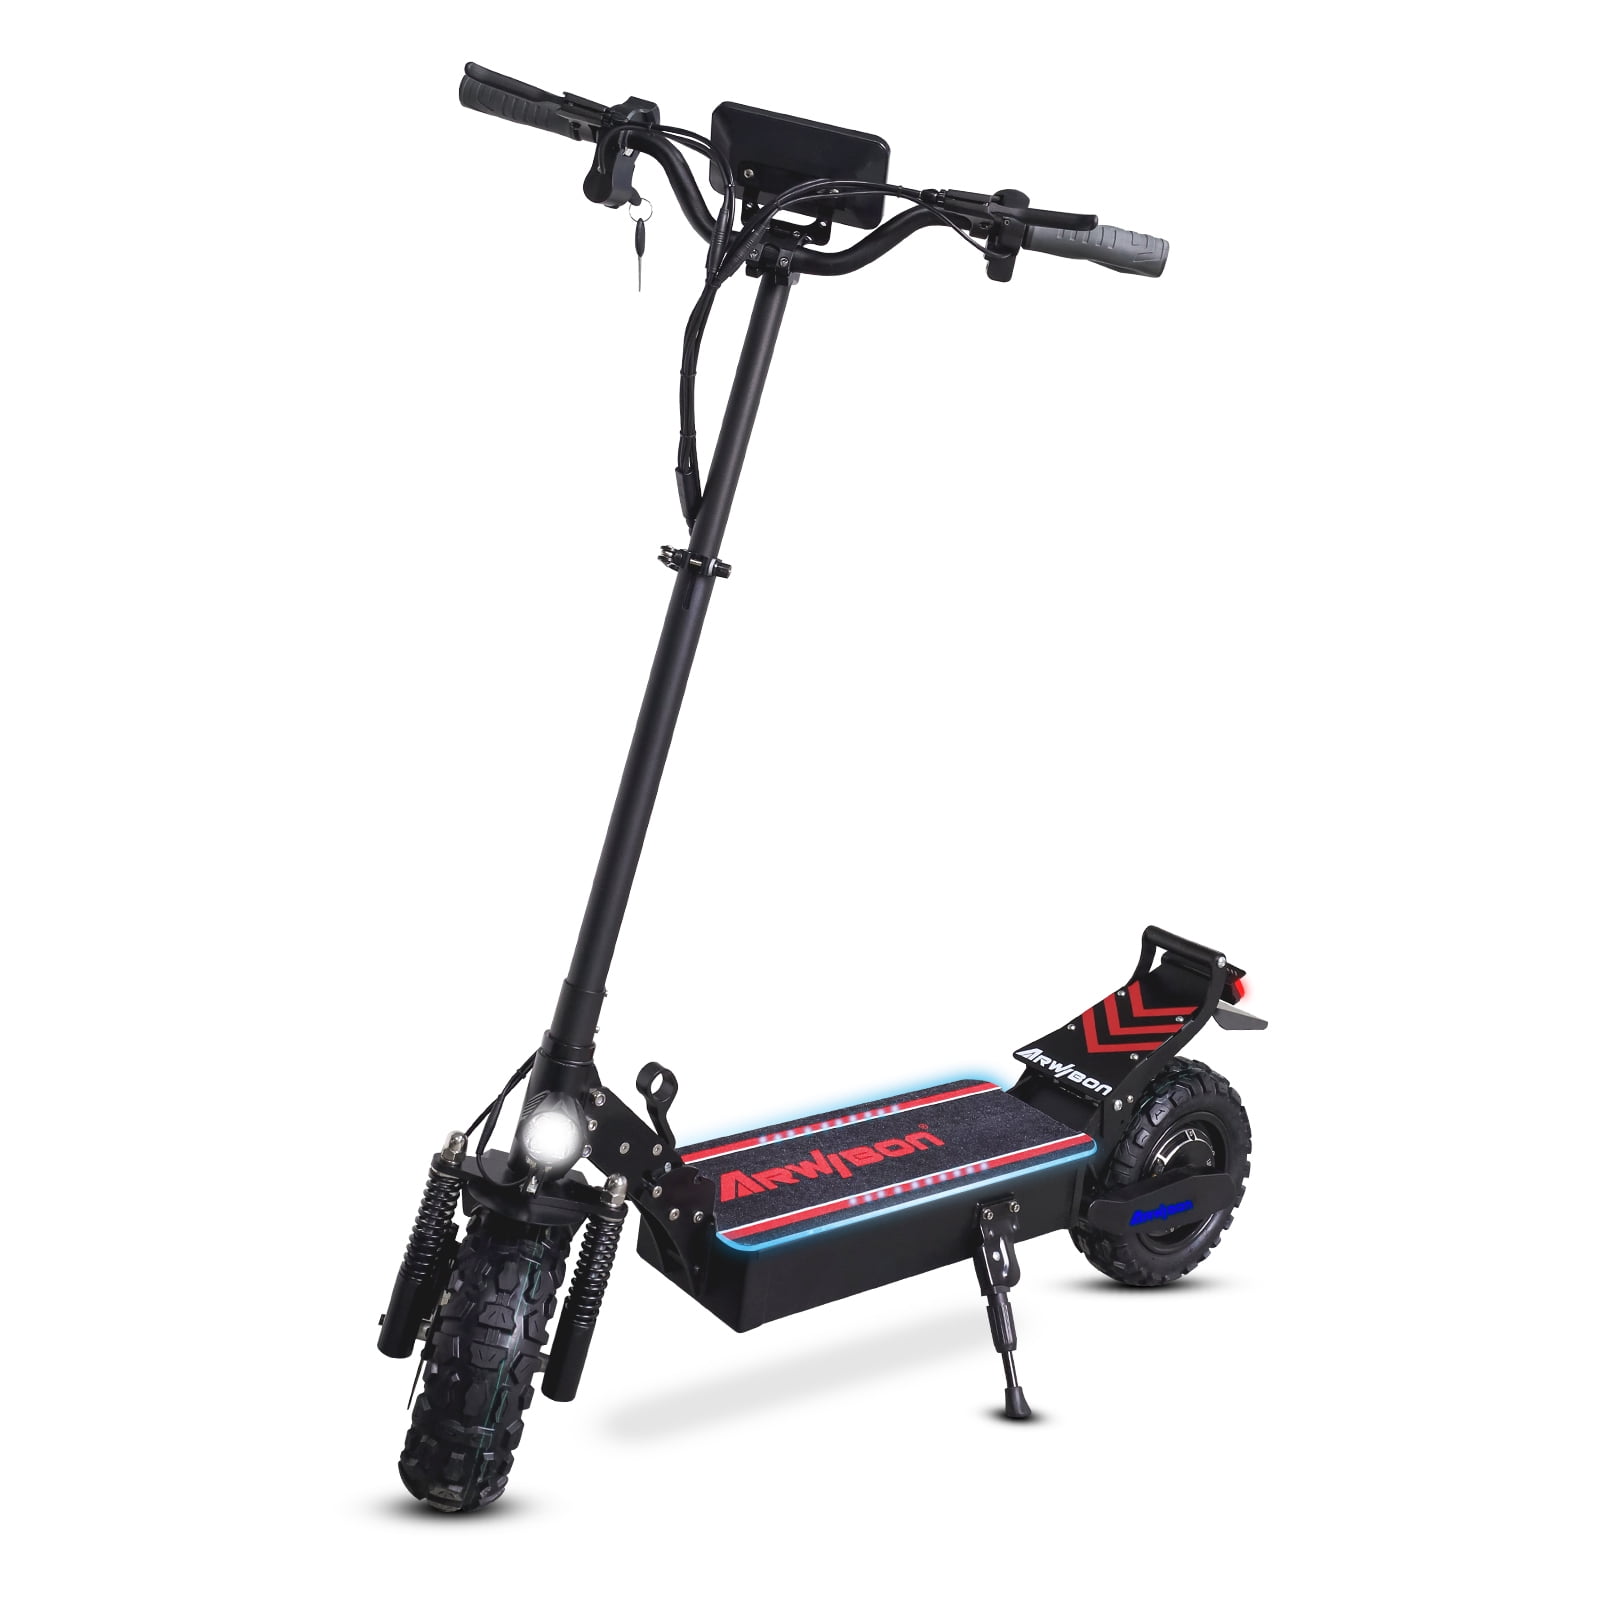 CUNFON Electric Kick Scooter 350W Motor Up to 19 Miles and 500W 24